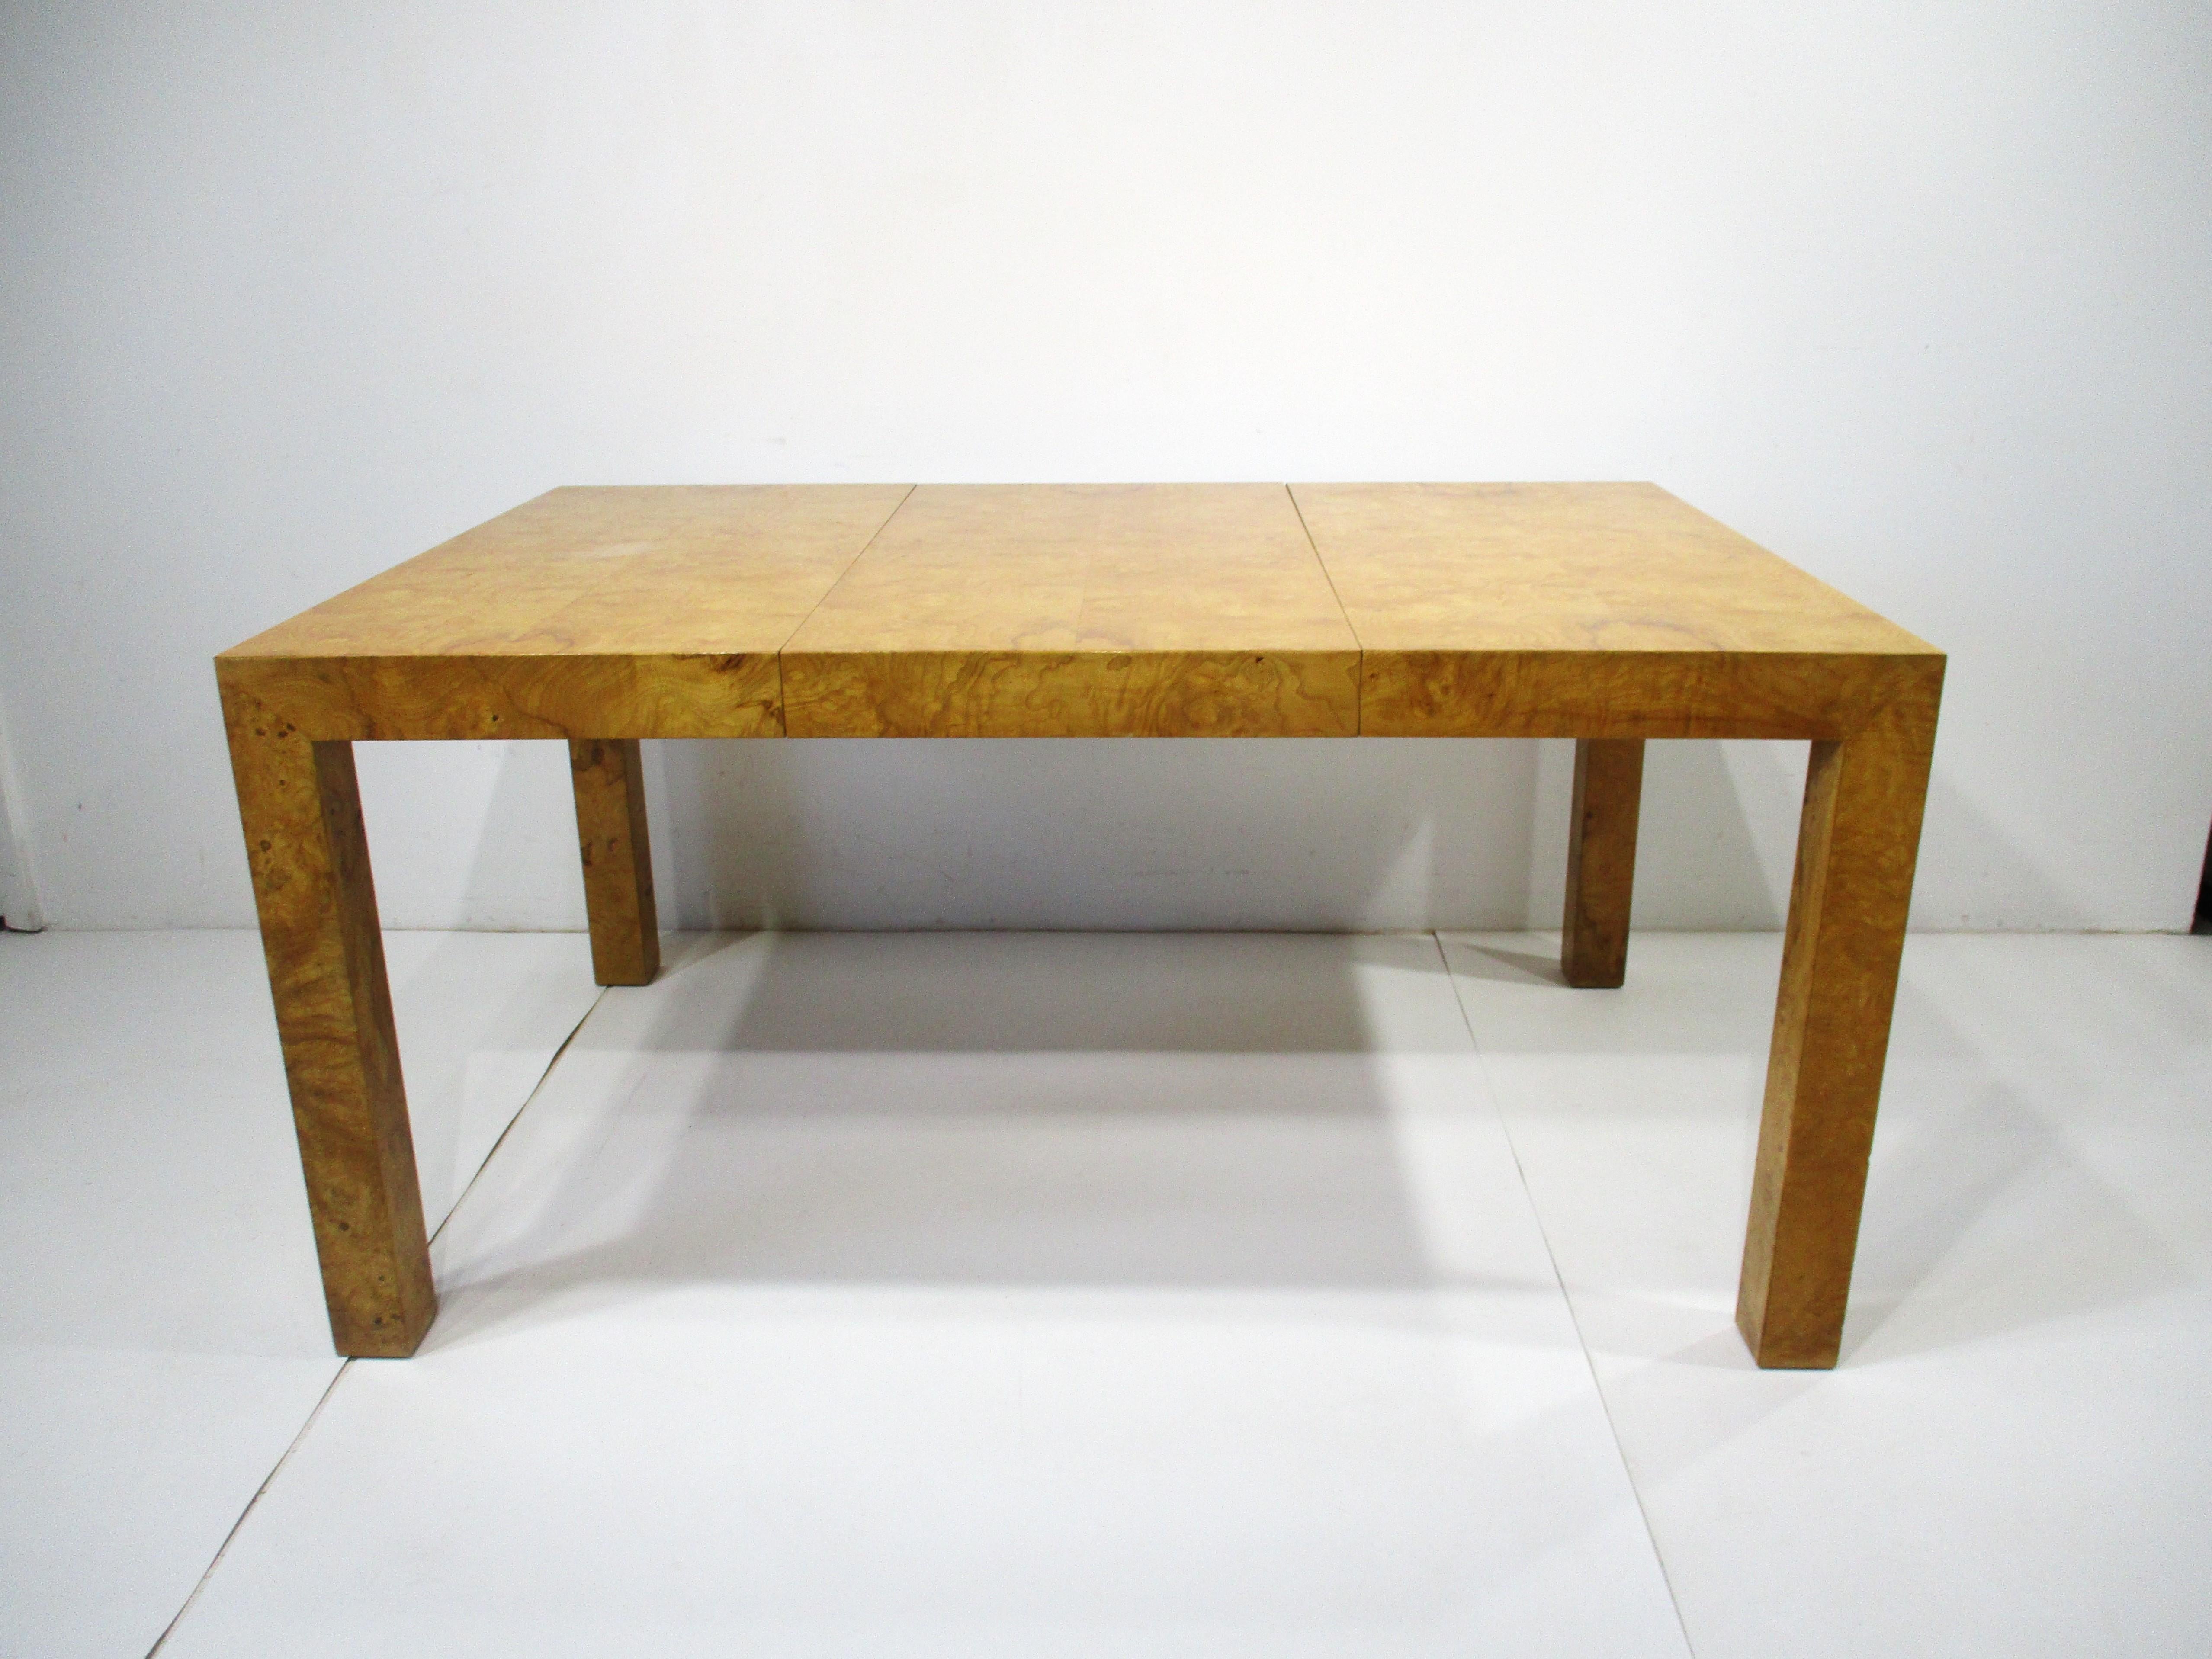 A wonderfully striking parson styled dining table in Olive burlwood with two 19.5